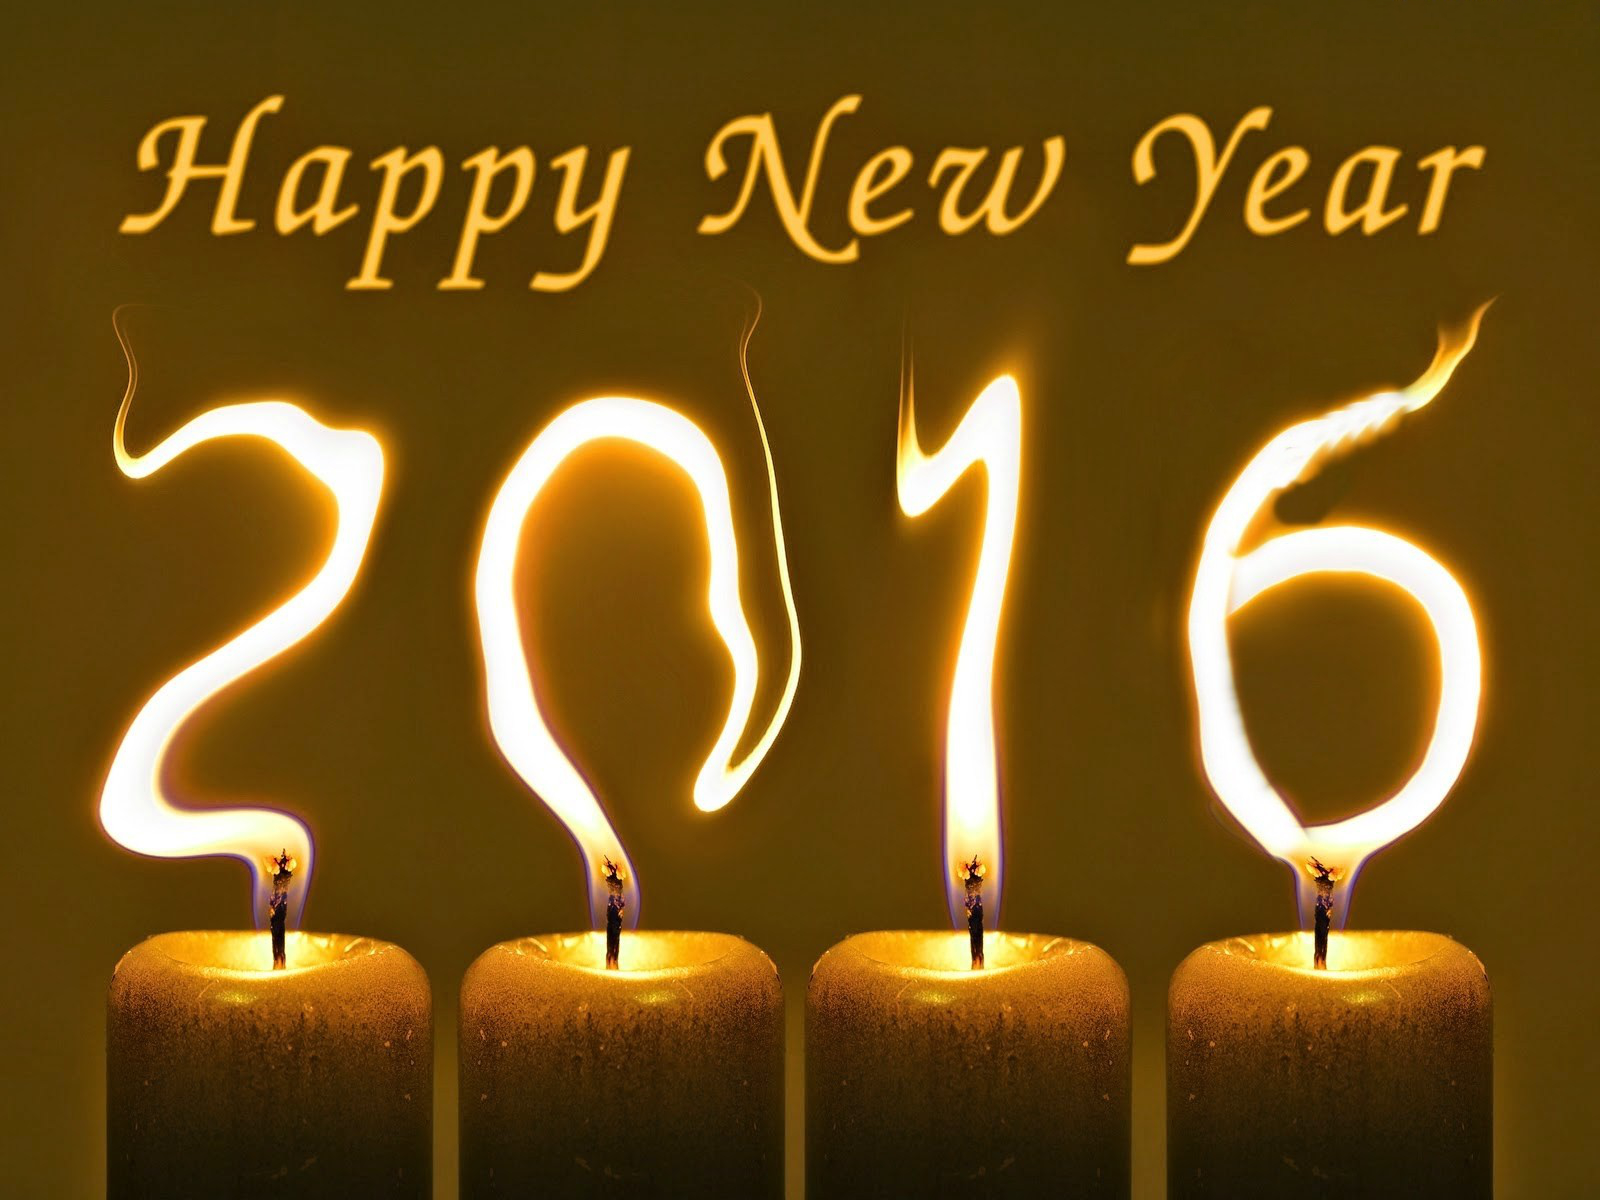 holiday, new year 2016, candle cellphone